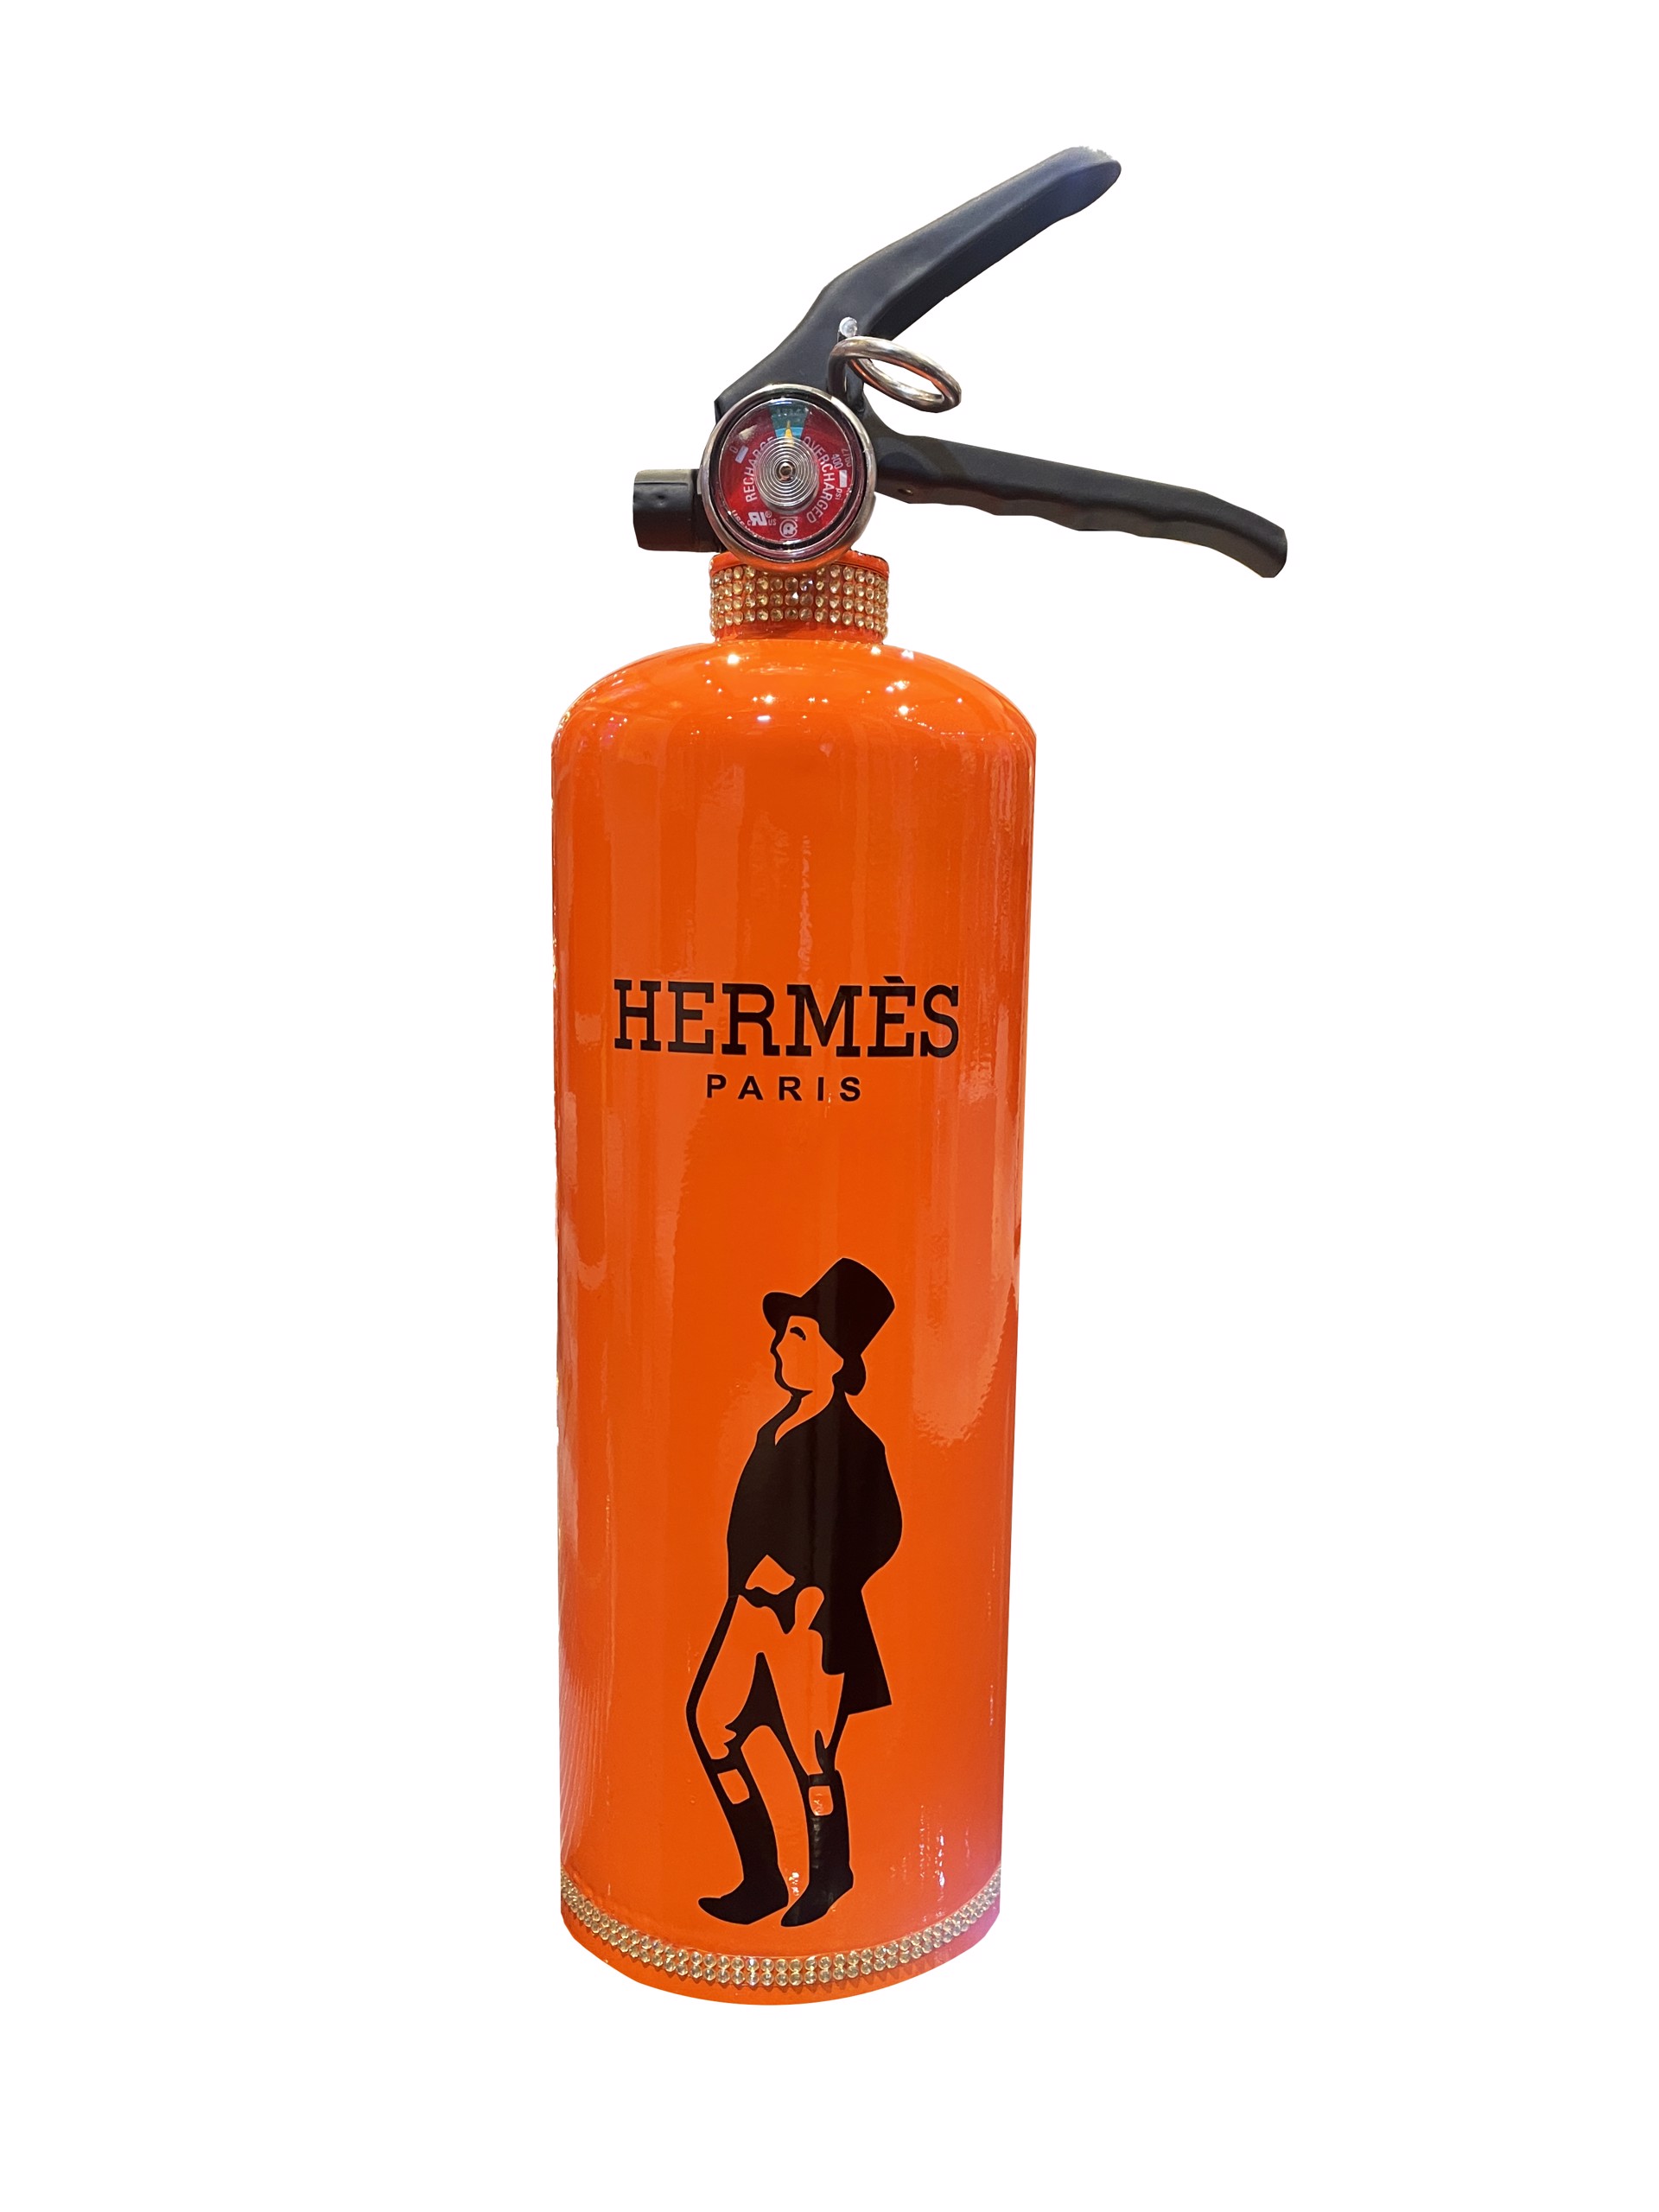 Hermes Fire Extinguisher by David Mir